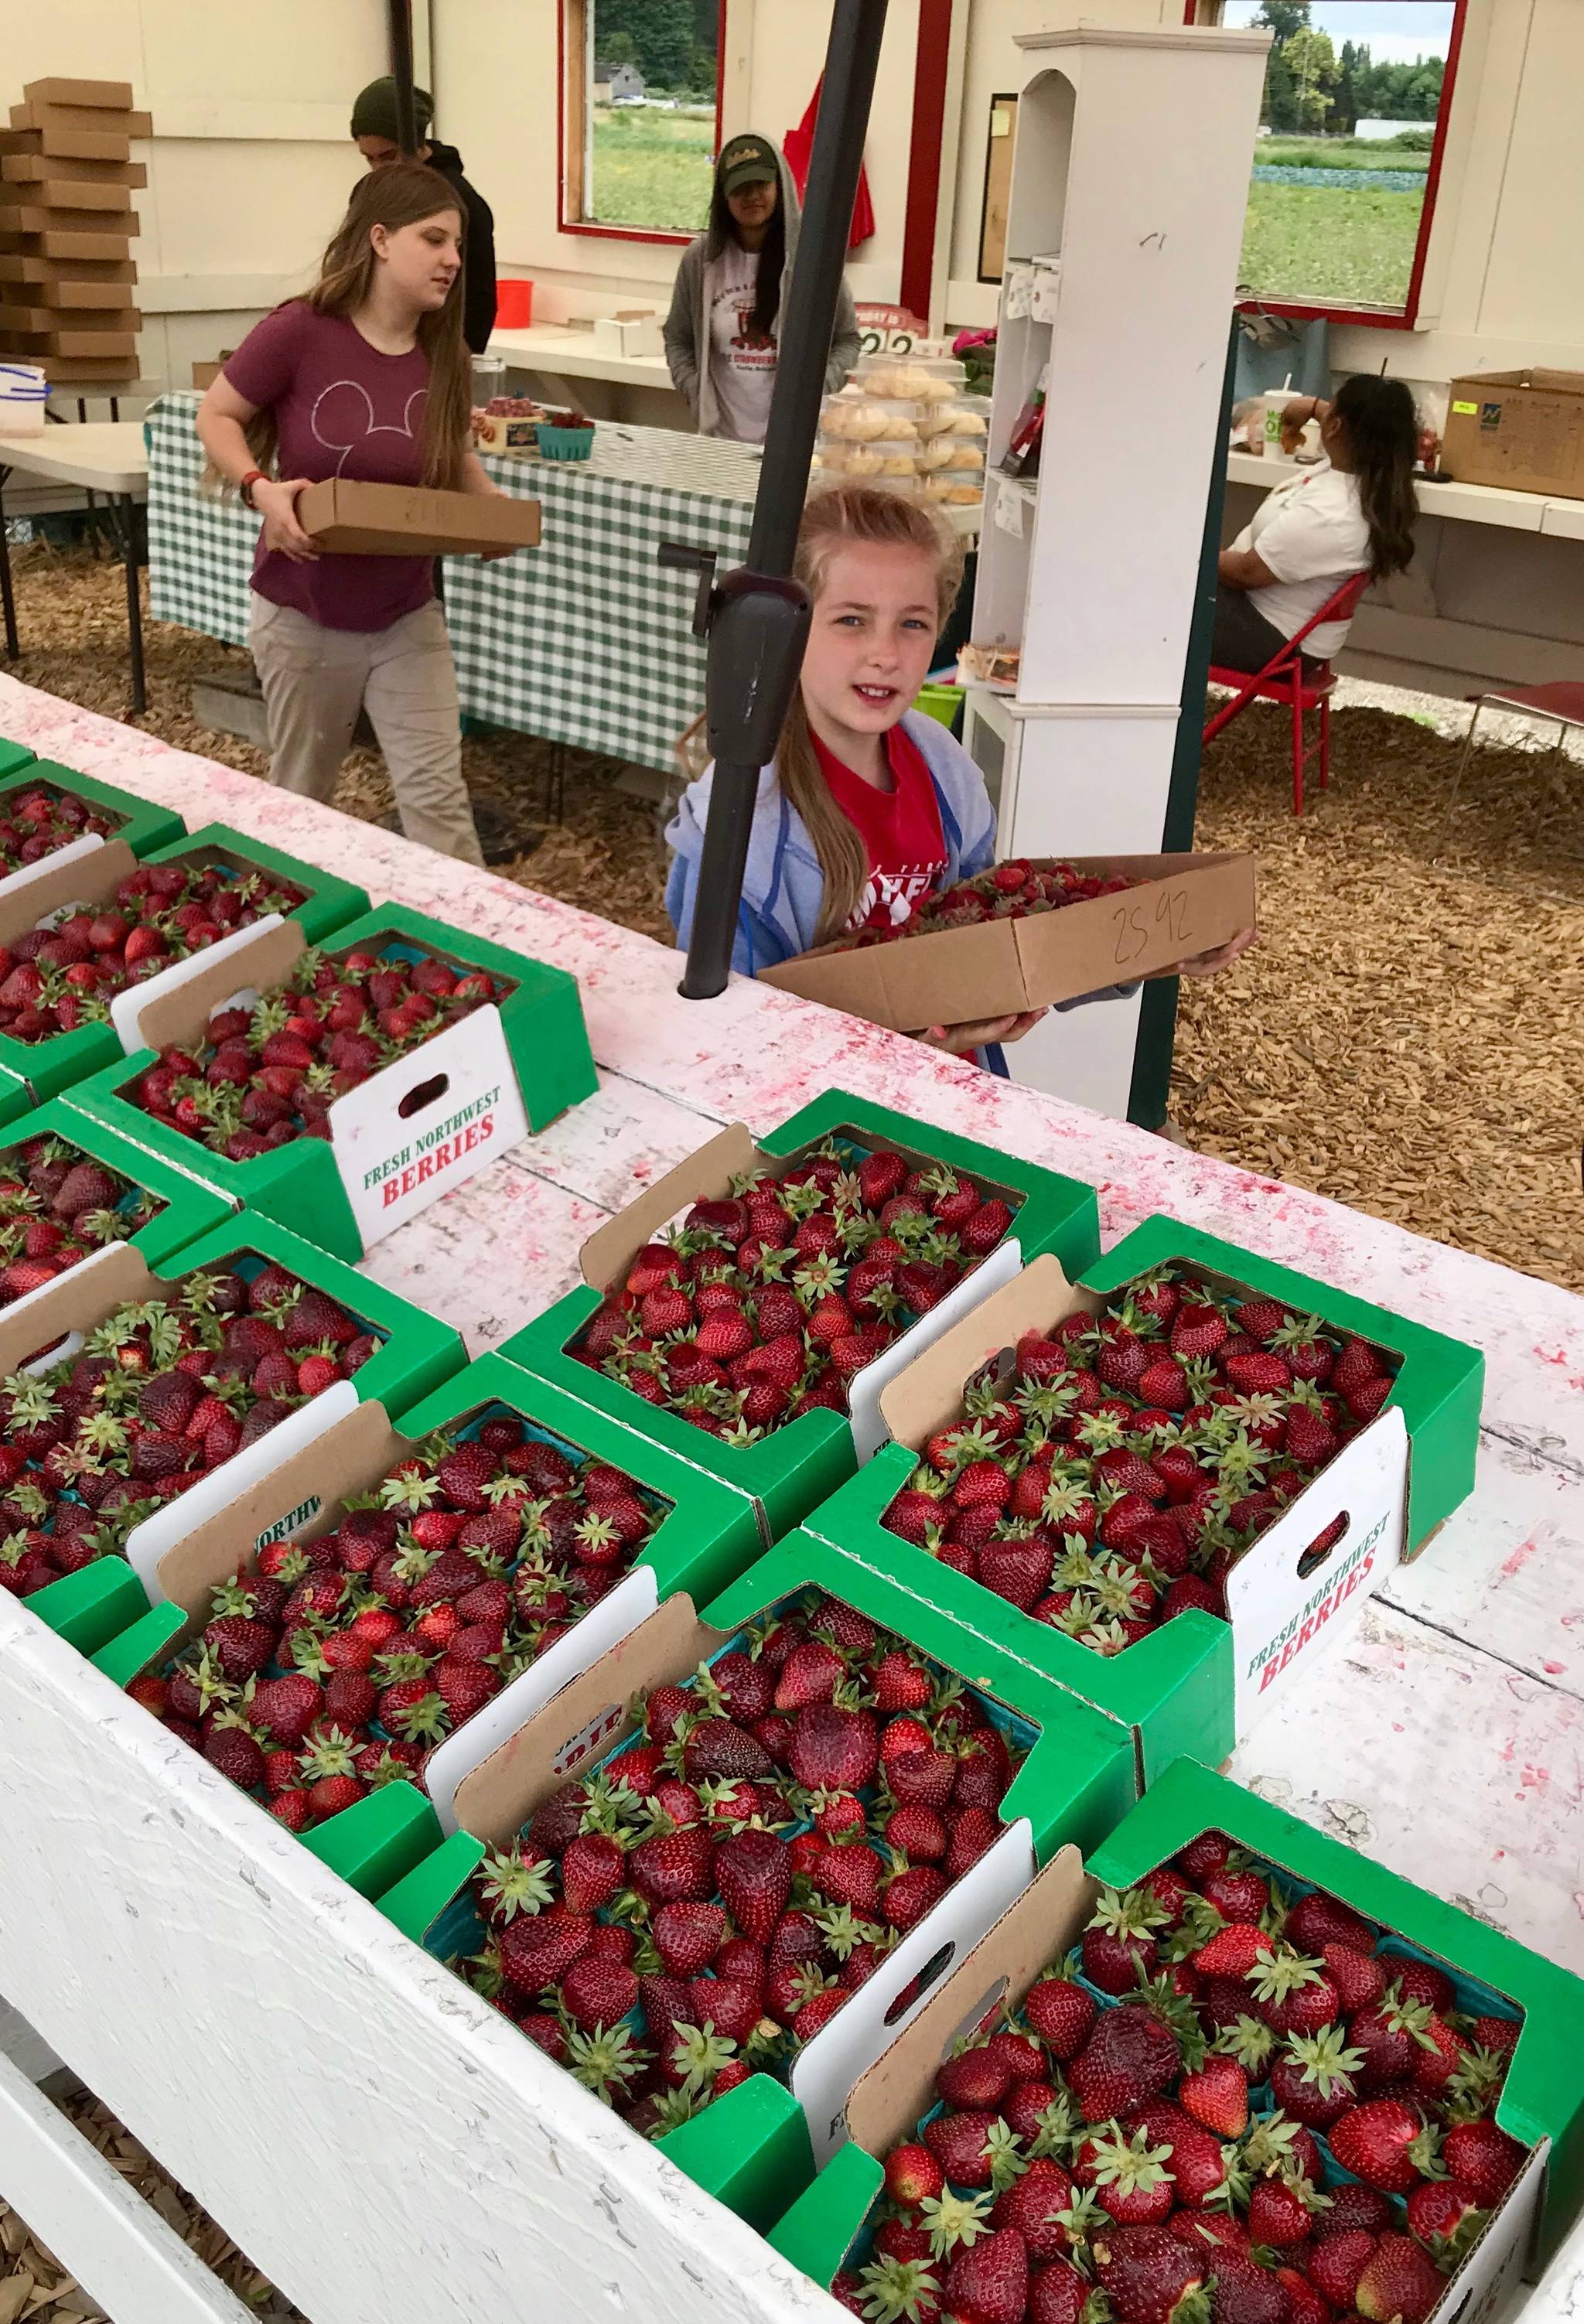 Customers carry out freshly picked strawberries on Saturday from the Al Duris Strawberry Farm along Frager Road South in Kent. MARK KLAAS, Kent Reporter